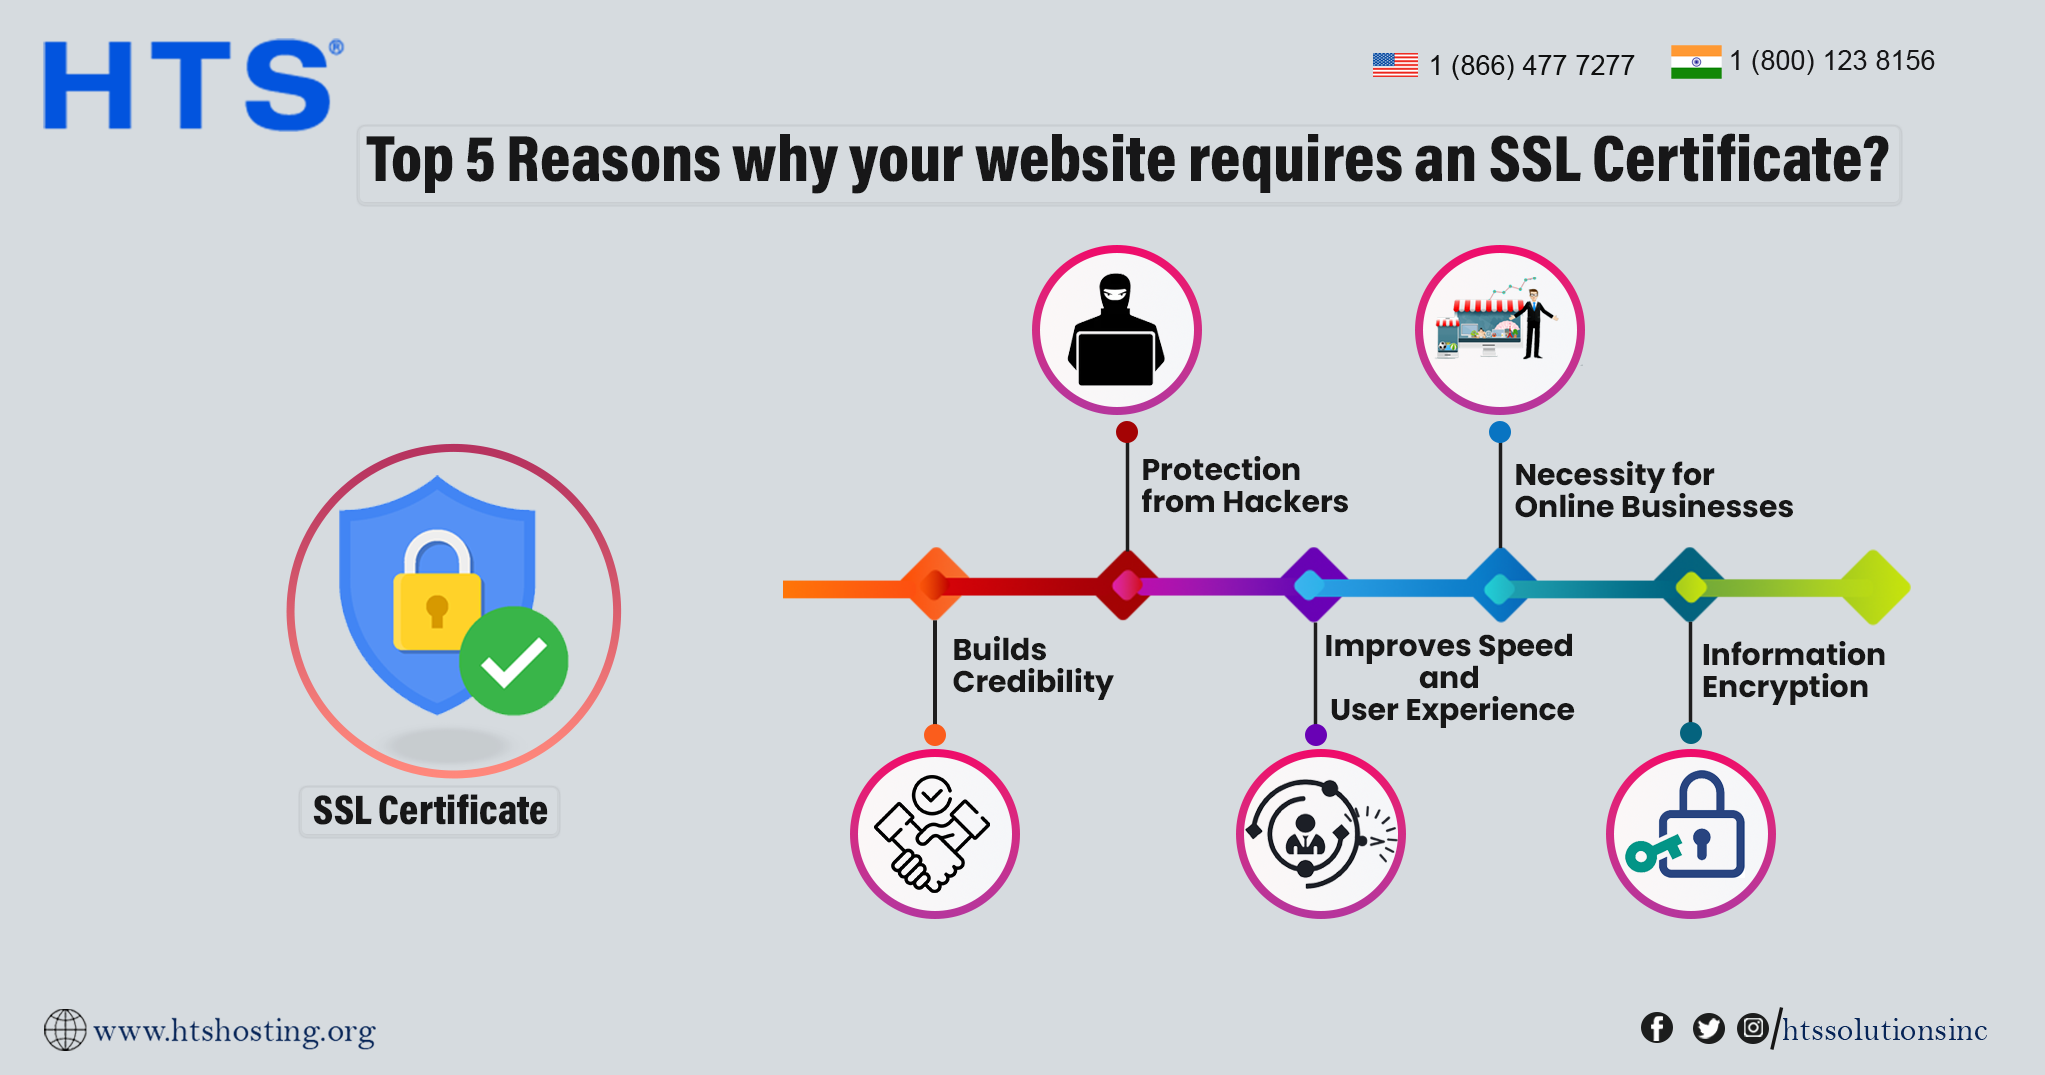 The Top 5 Reasons Why Your Website Requires an SSL Certificate